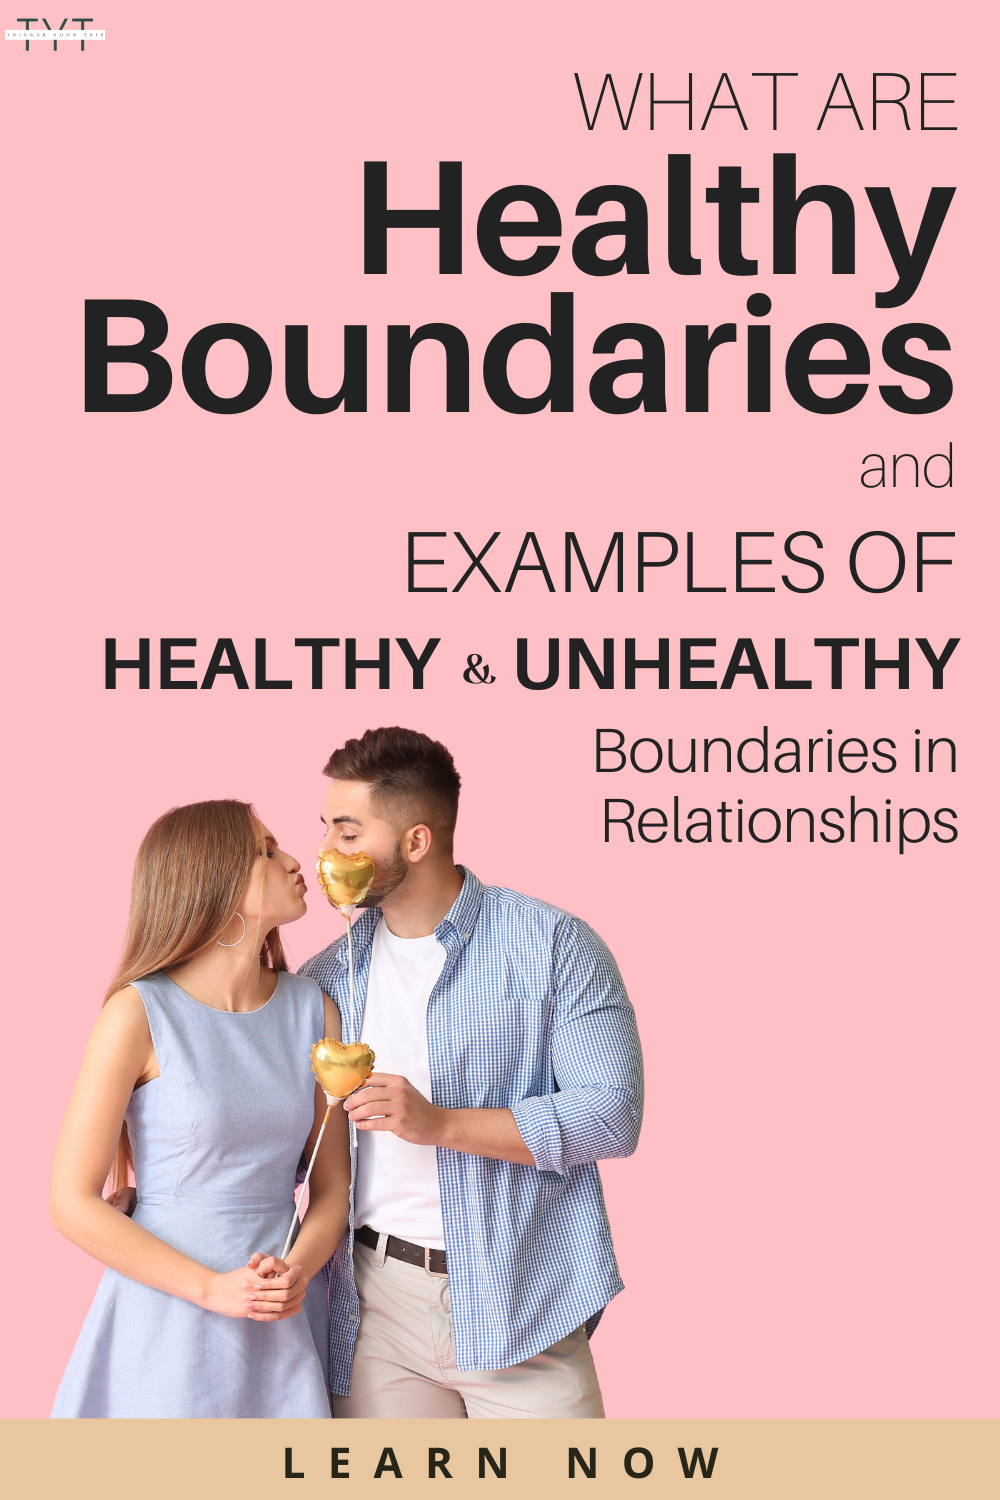 healthy boundaries in relationships and how to set boundaries (boundary setting)